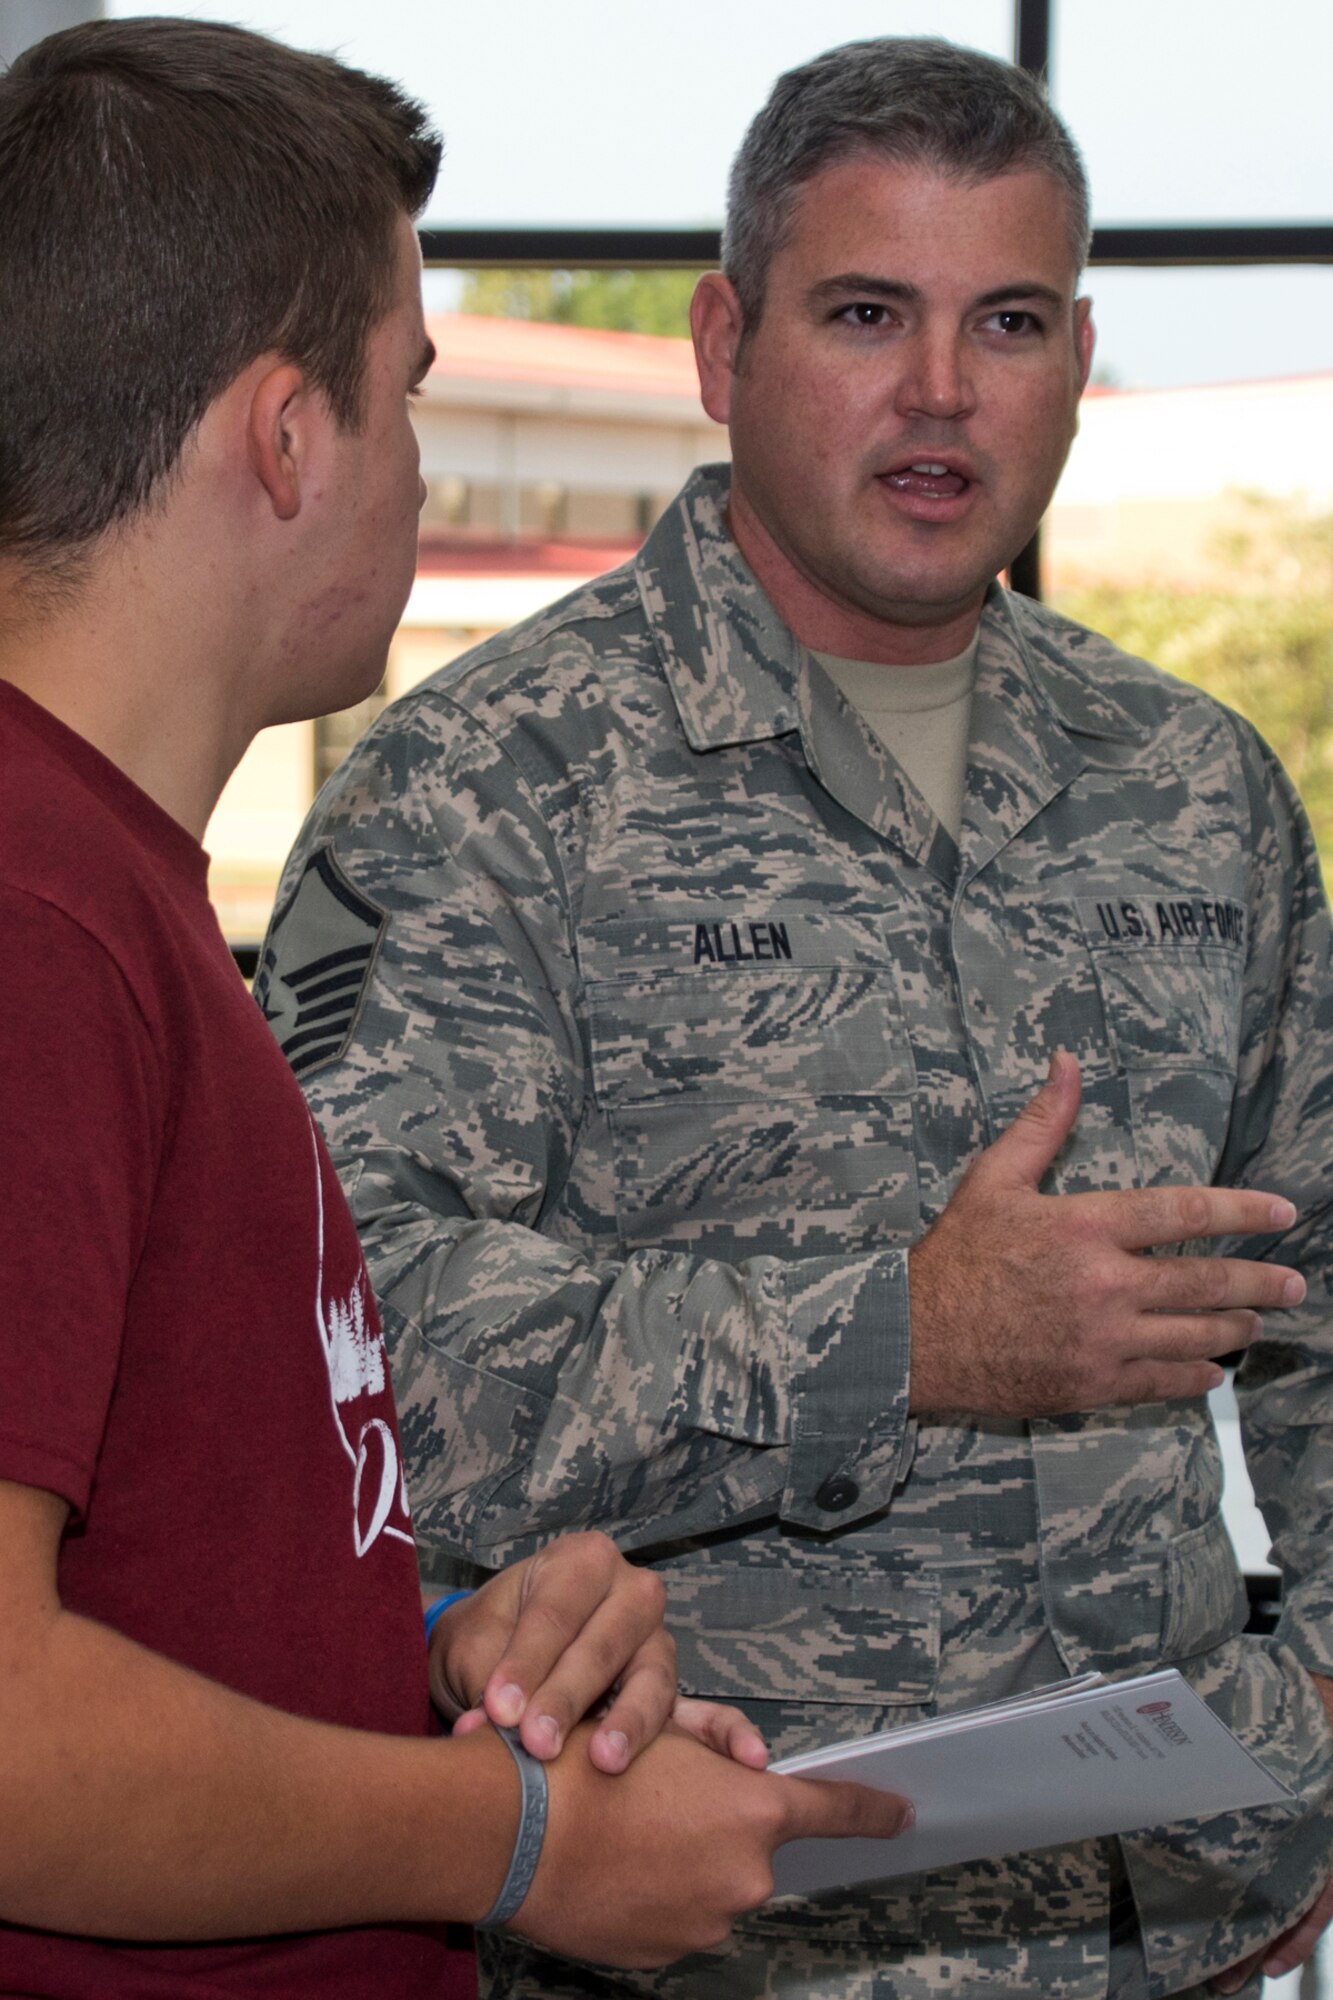 U.S. Air Force Reserve Master Sgt. Mark Allen, program manager for the 913th Airlift Group’s Development Training Flight, speaks with a potential recruit during the annual Cabot College and Career Fair at Cabot High School in Cabot, Ark., Sept. 28, 2017. Approximately 1,000 juniors and seniors spoke with representatives of local colleges, technical and vocational schools along with military recruiters at the event. (U.S. Air Force photo by Master Sgt. Jeff Walston/Released)